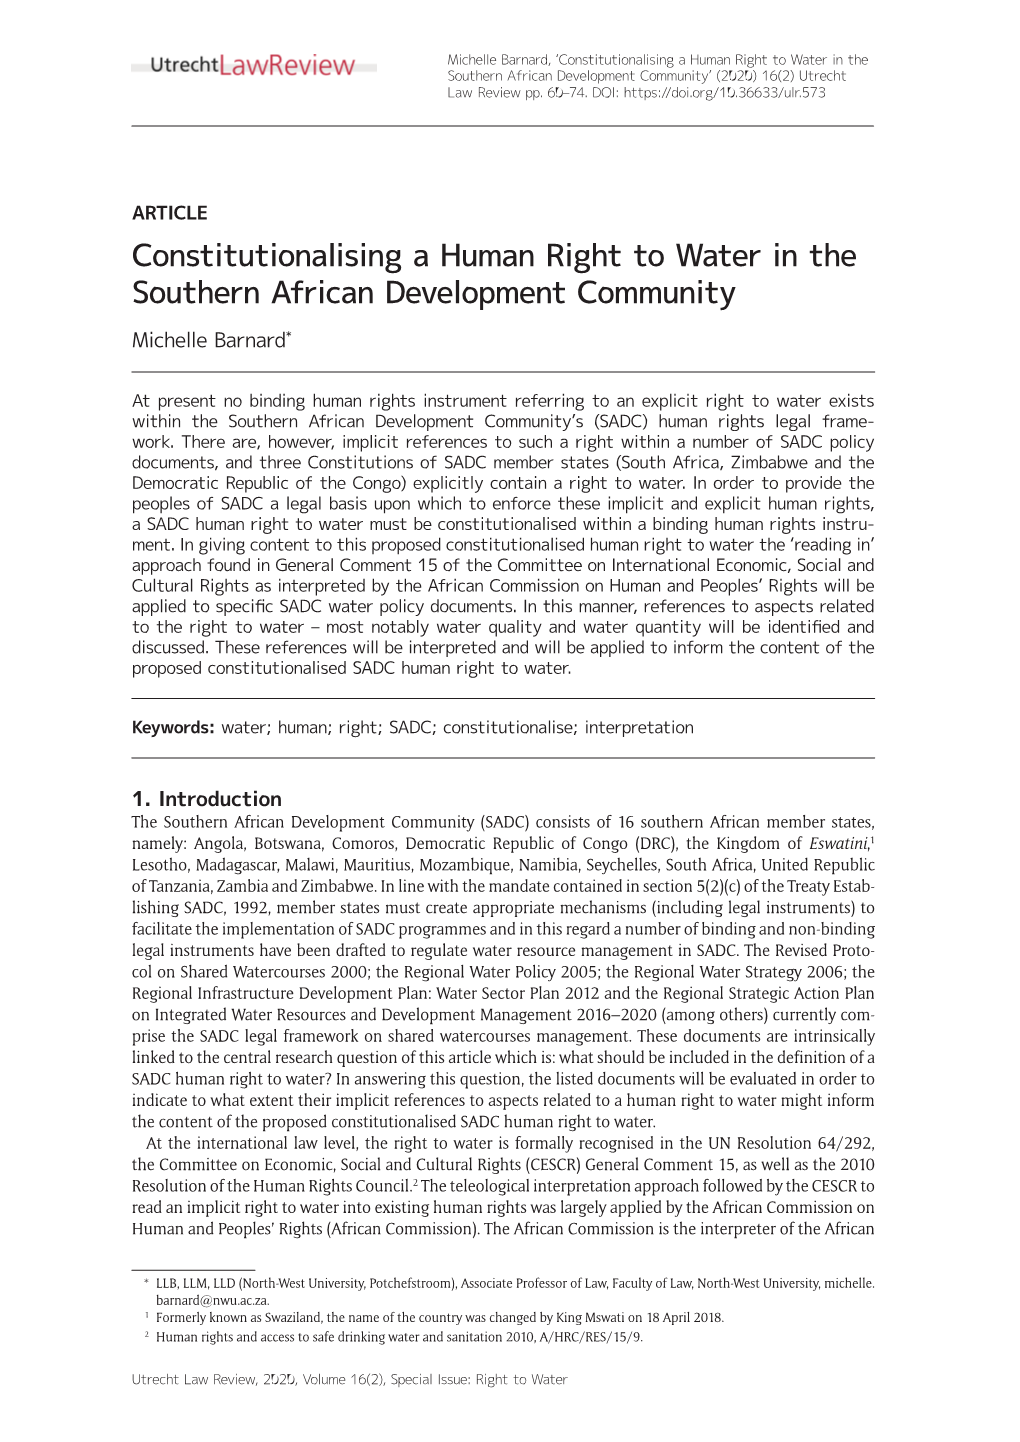 Constitutionalising a Human Right to Water in the Southern African Development Community’ (2020) 16(2) Utrecht Law Review Pp